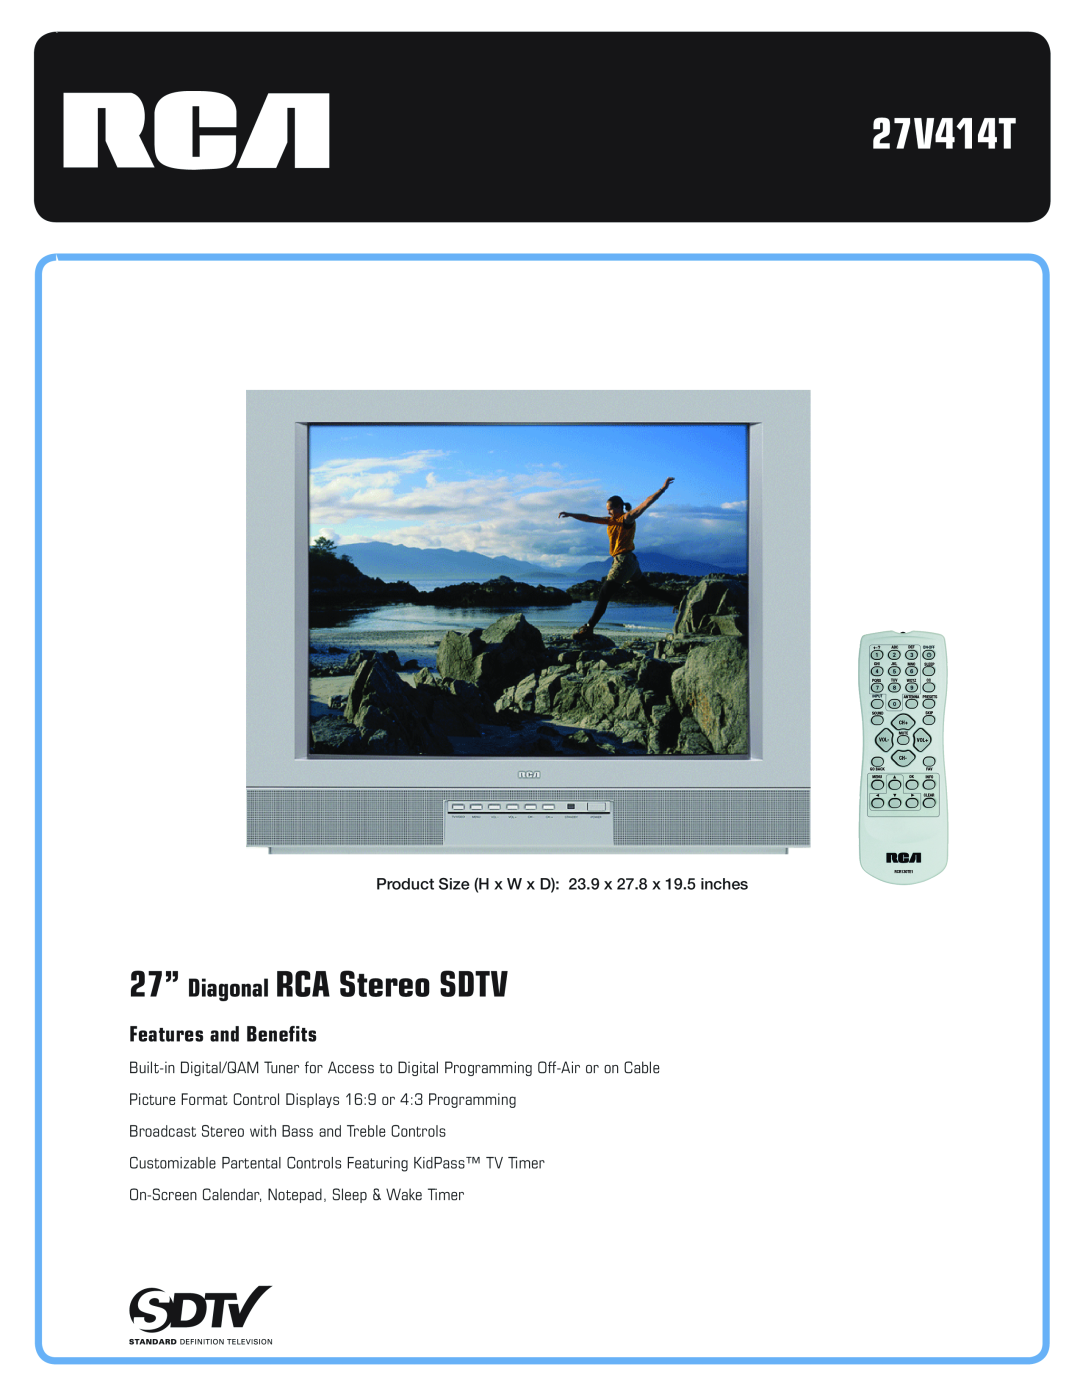 RCA 27V414T manual 27” Diagonal RCA Stereo SDTV, Features and Benefits, Product Size H x W x D 23.9 x 27.8 x 19.5 inches 